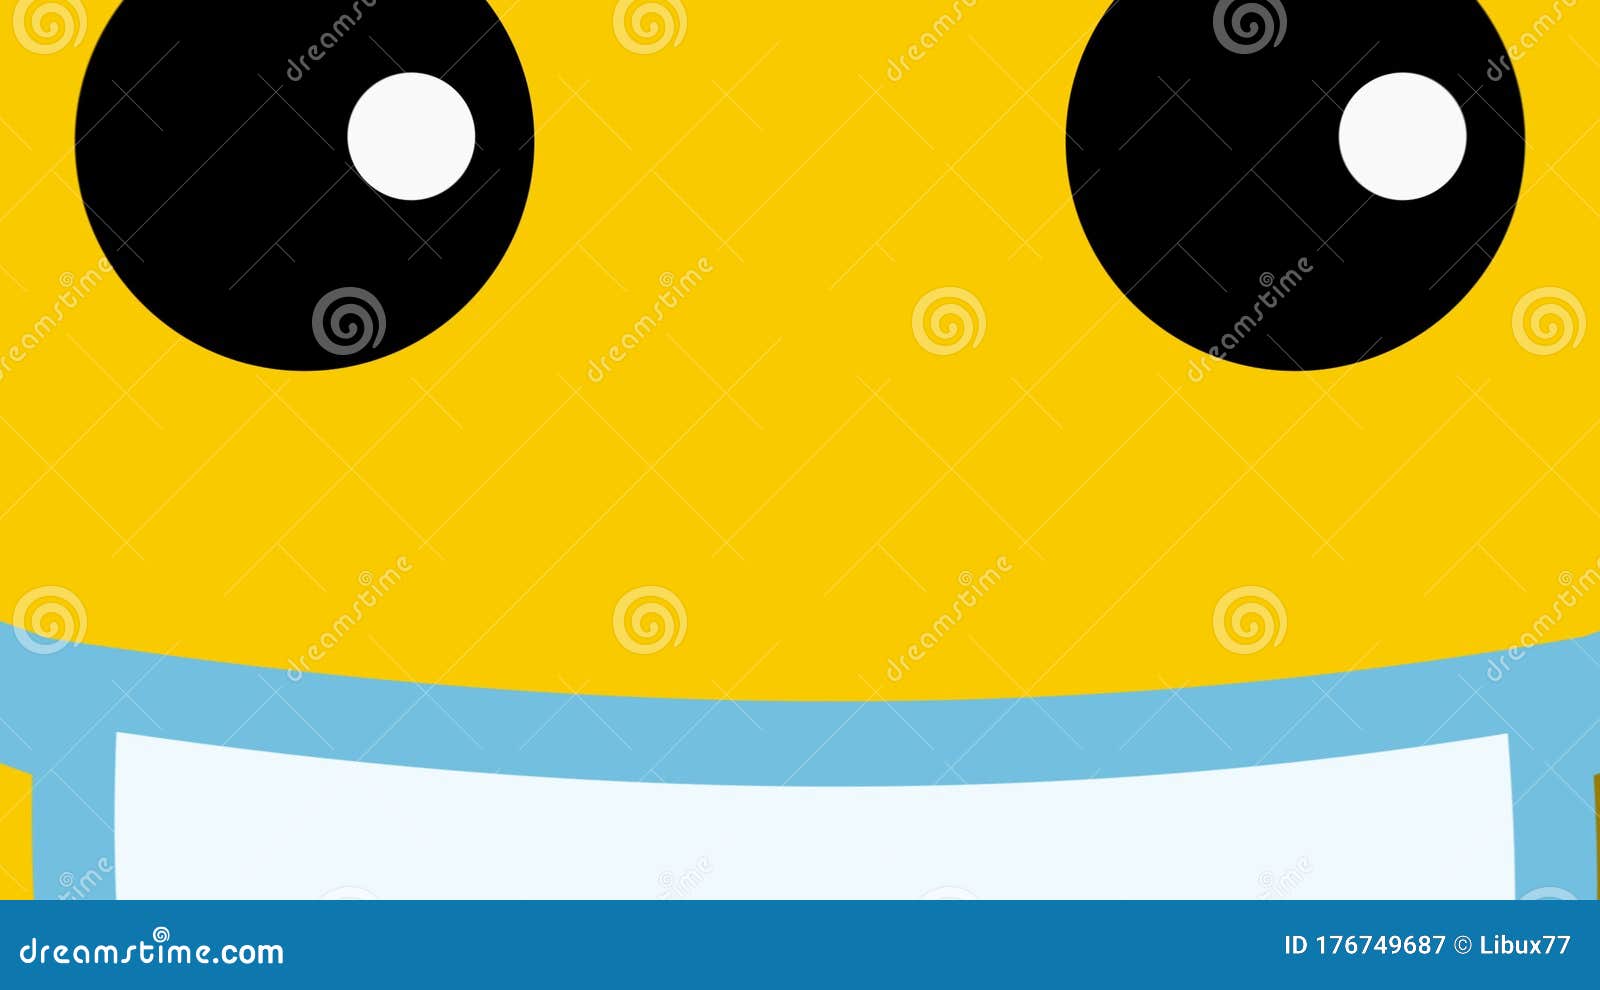 animated sick smiley face